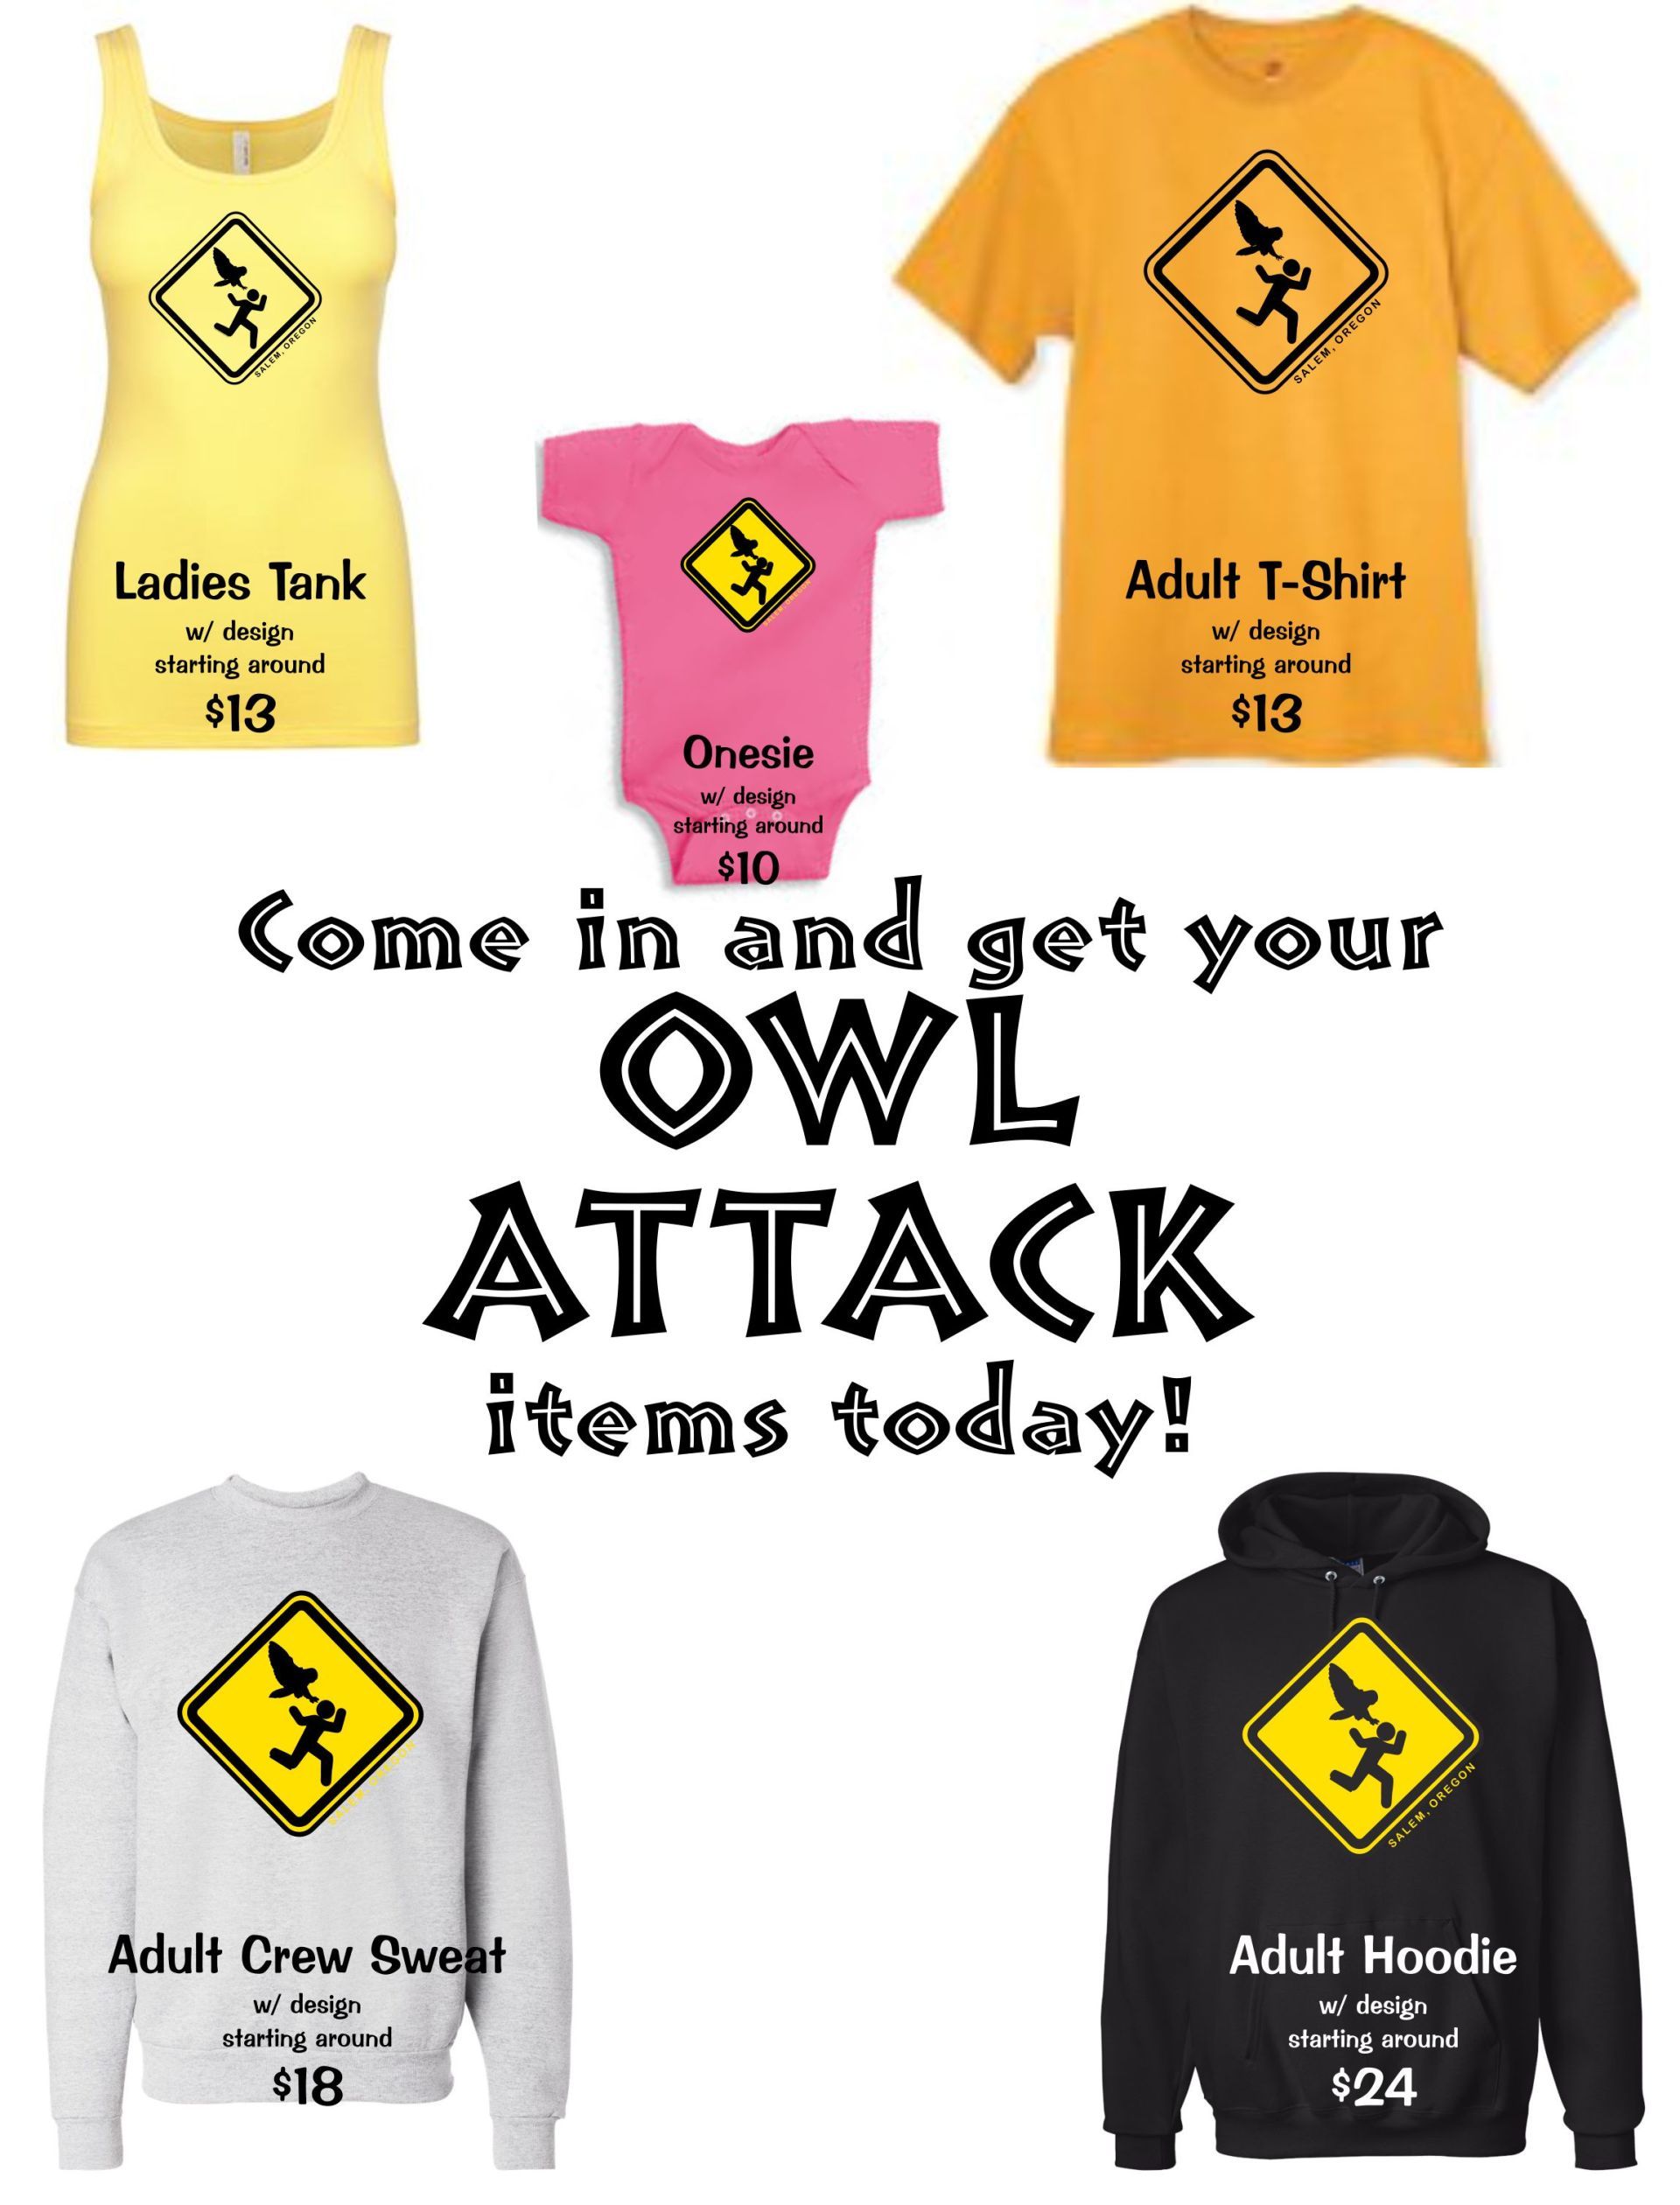 Owl Attack Items